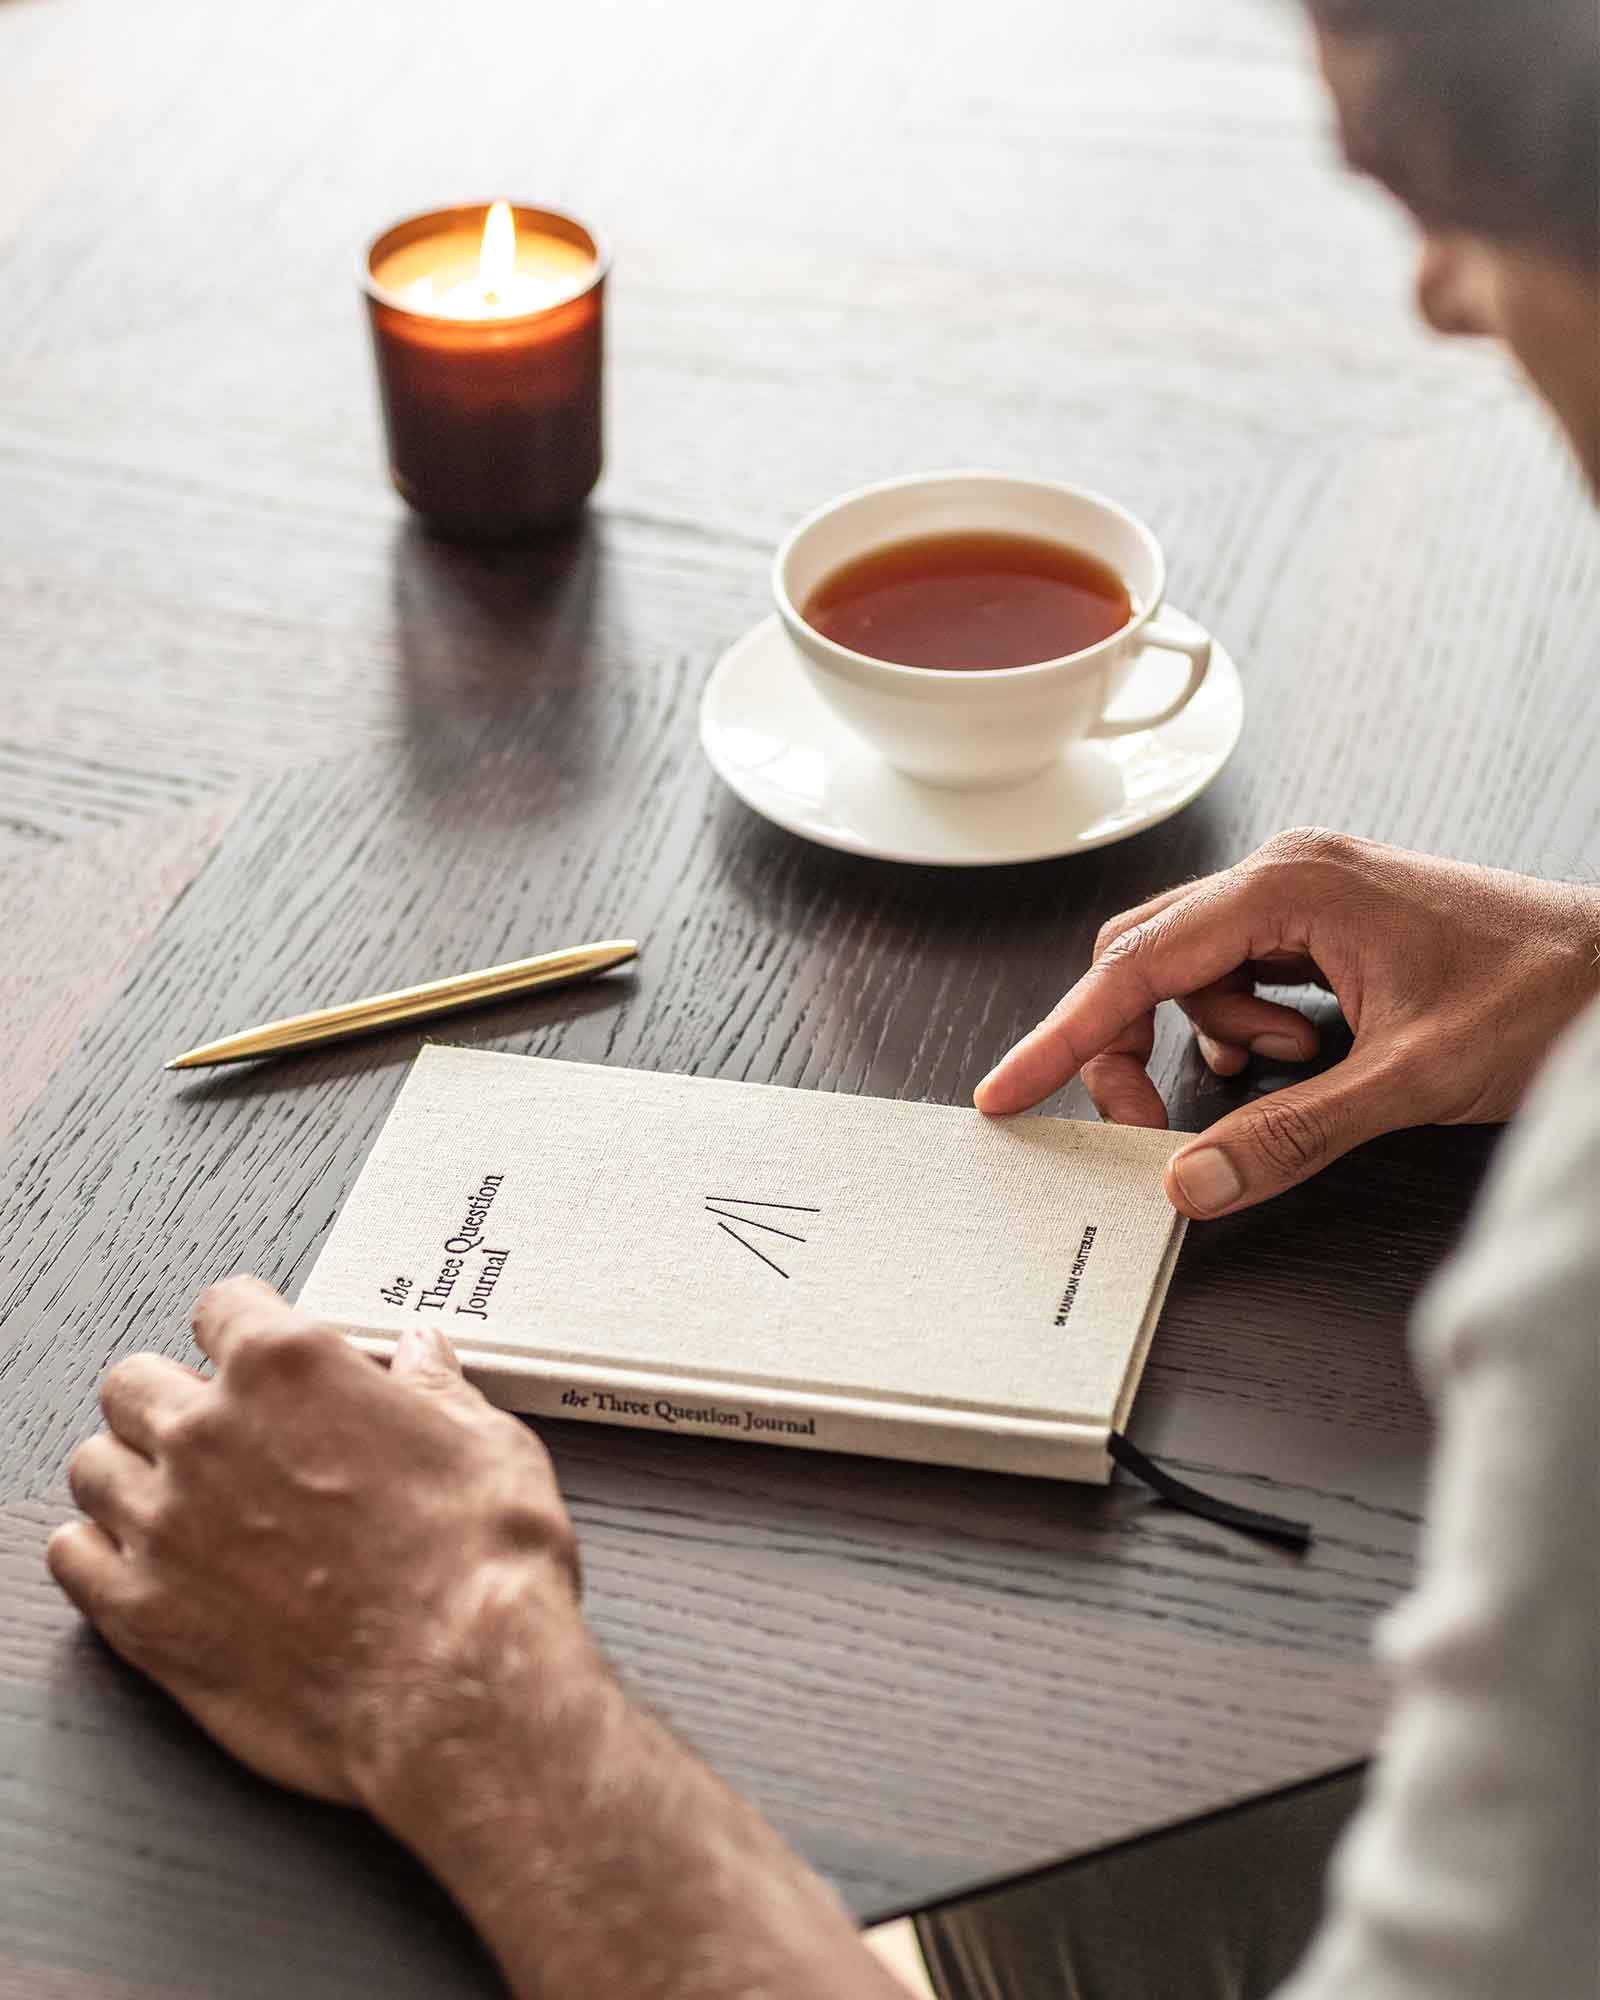 6 Daily Rituals Inspired by the Three Question Journal – Intelligent Change